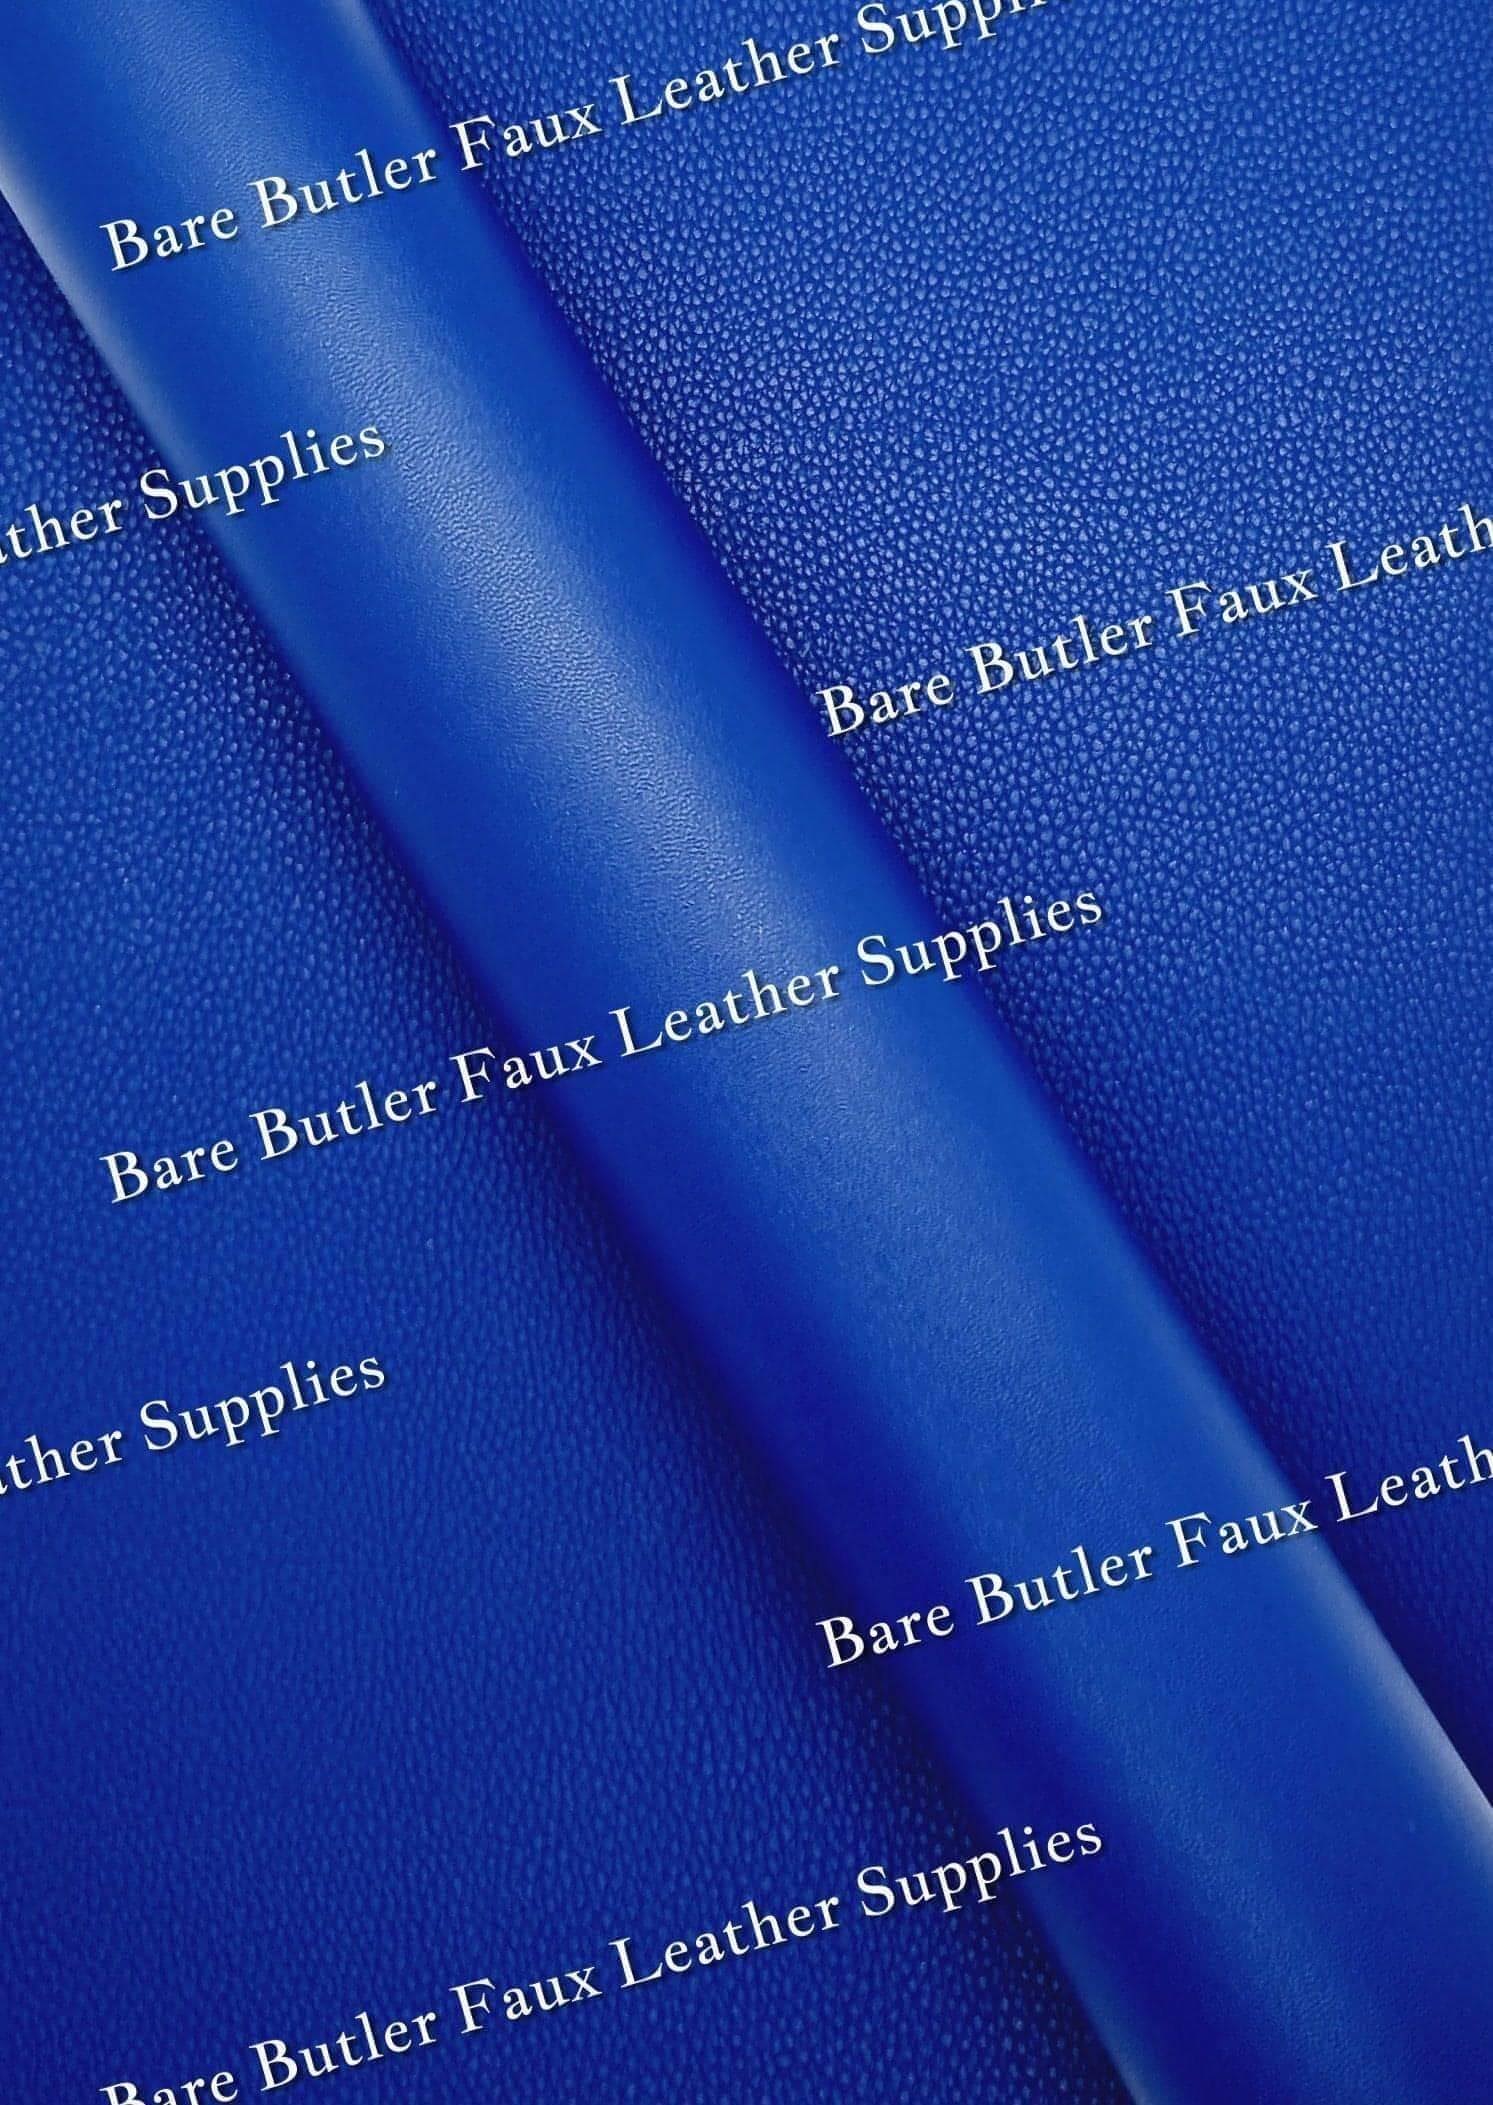 Double Sided Solid Colour Litchi - Royal Blue - Faux, Faux Leather, Leather, leatherette - Bare Butler Faux Leather Supplies 